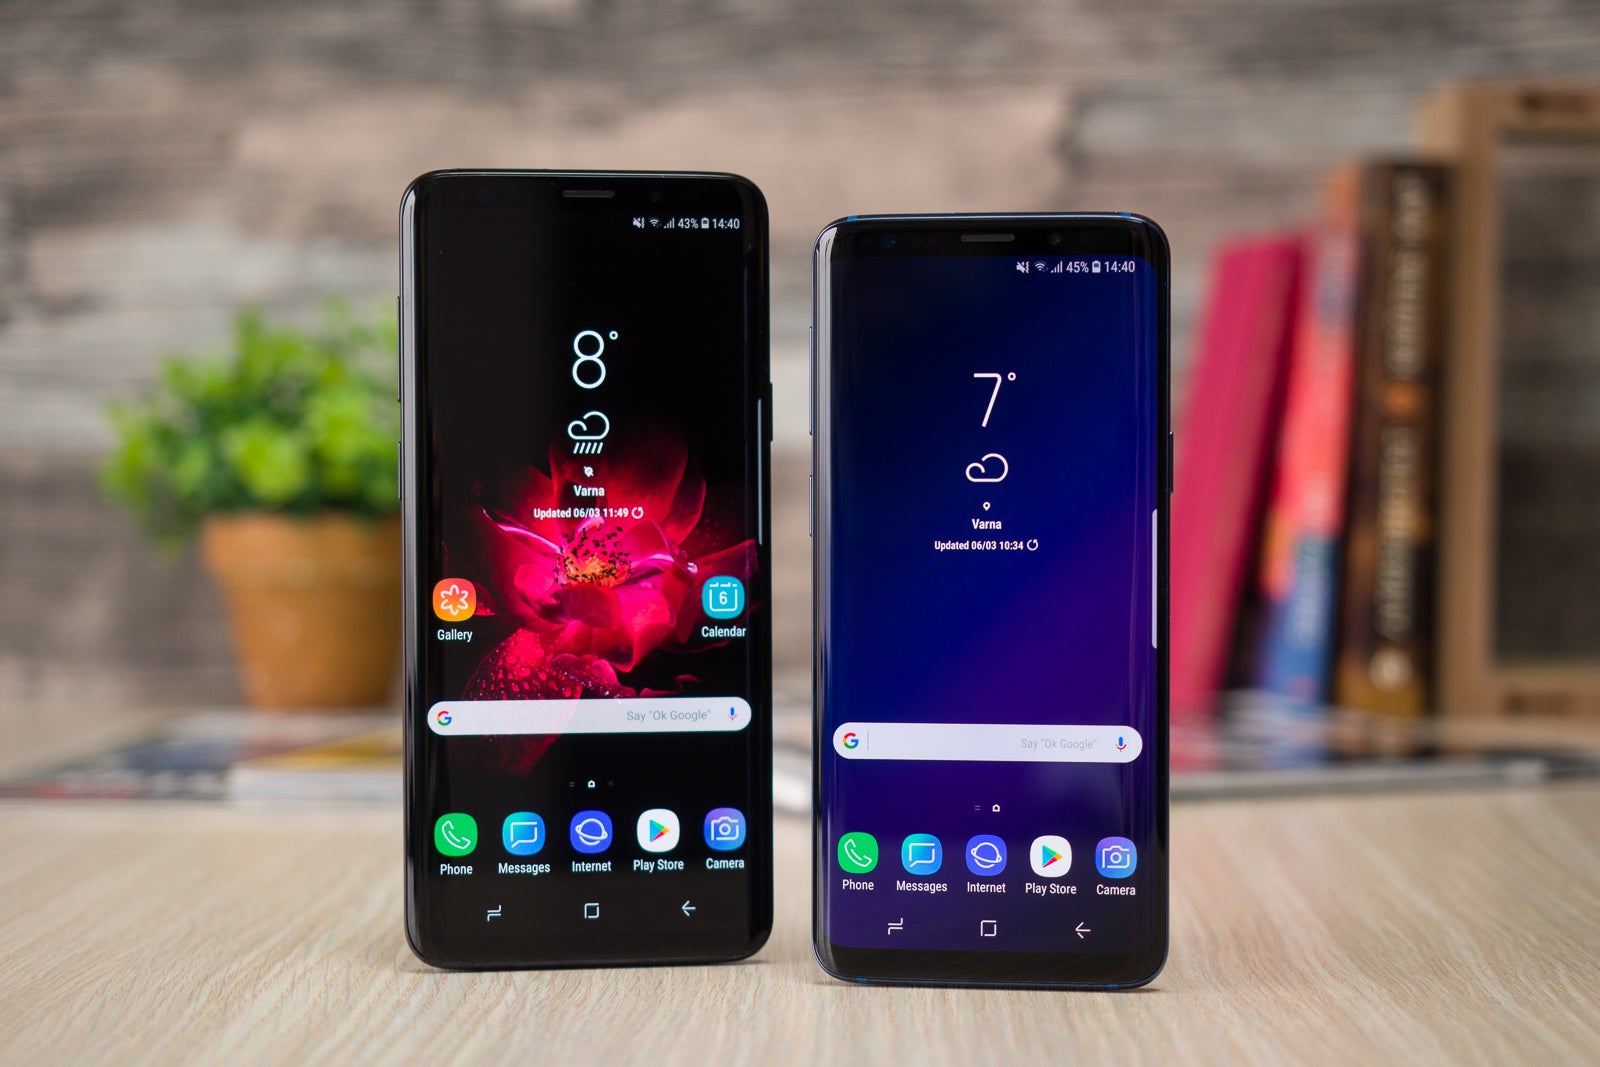 Got a Samsung Galaxy S9 or S9+? If so, you might be able to join Samsung's new One UI beta program - Galaxy S9/S9+ Android Pie beta program starting today, here's how to enroll